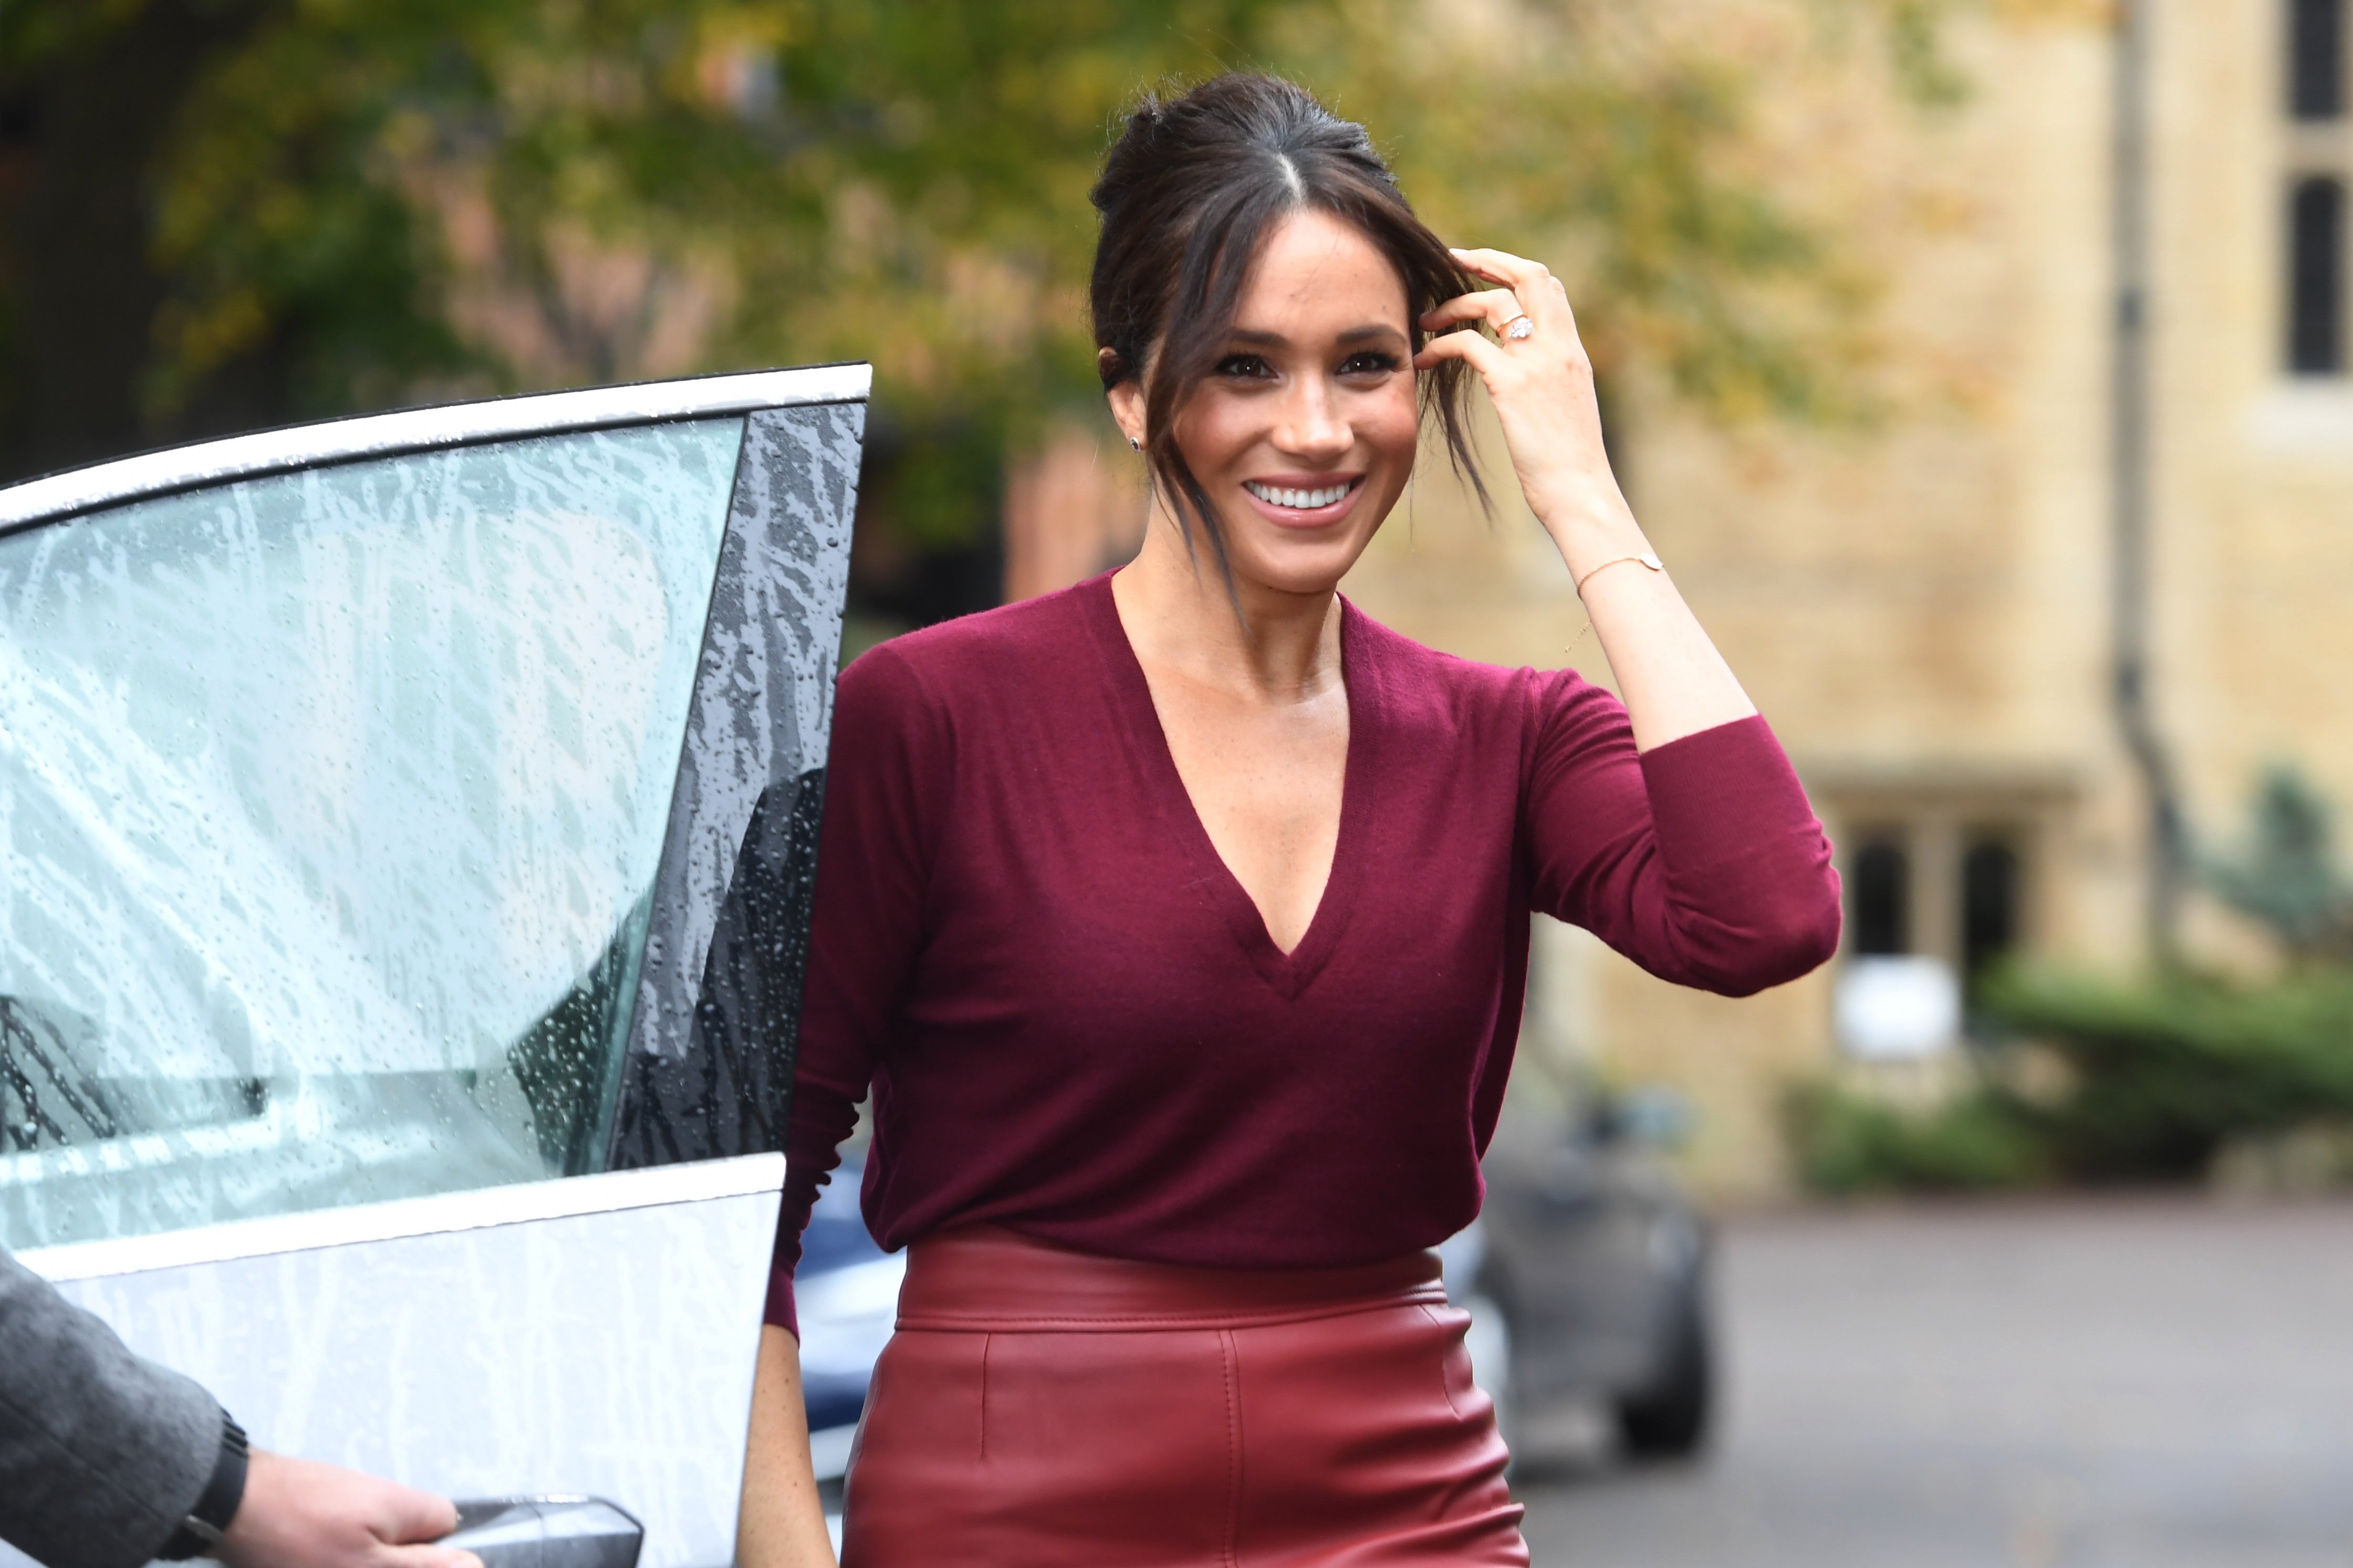 Meghan Markle attends a roundtable discussion on gender equality with The Queens Commonwealth Trust (QCT) and One Young World at Windsor Castle on October 25, 2019. | Photo: Getty Images